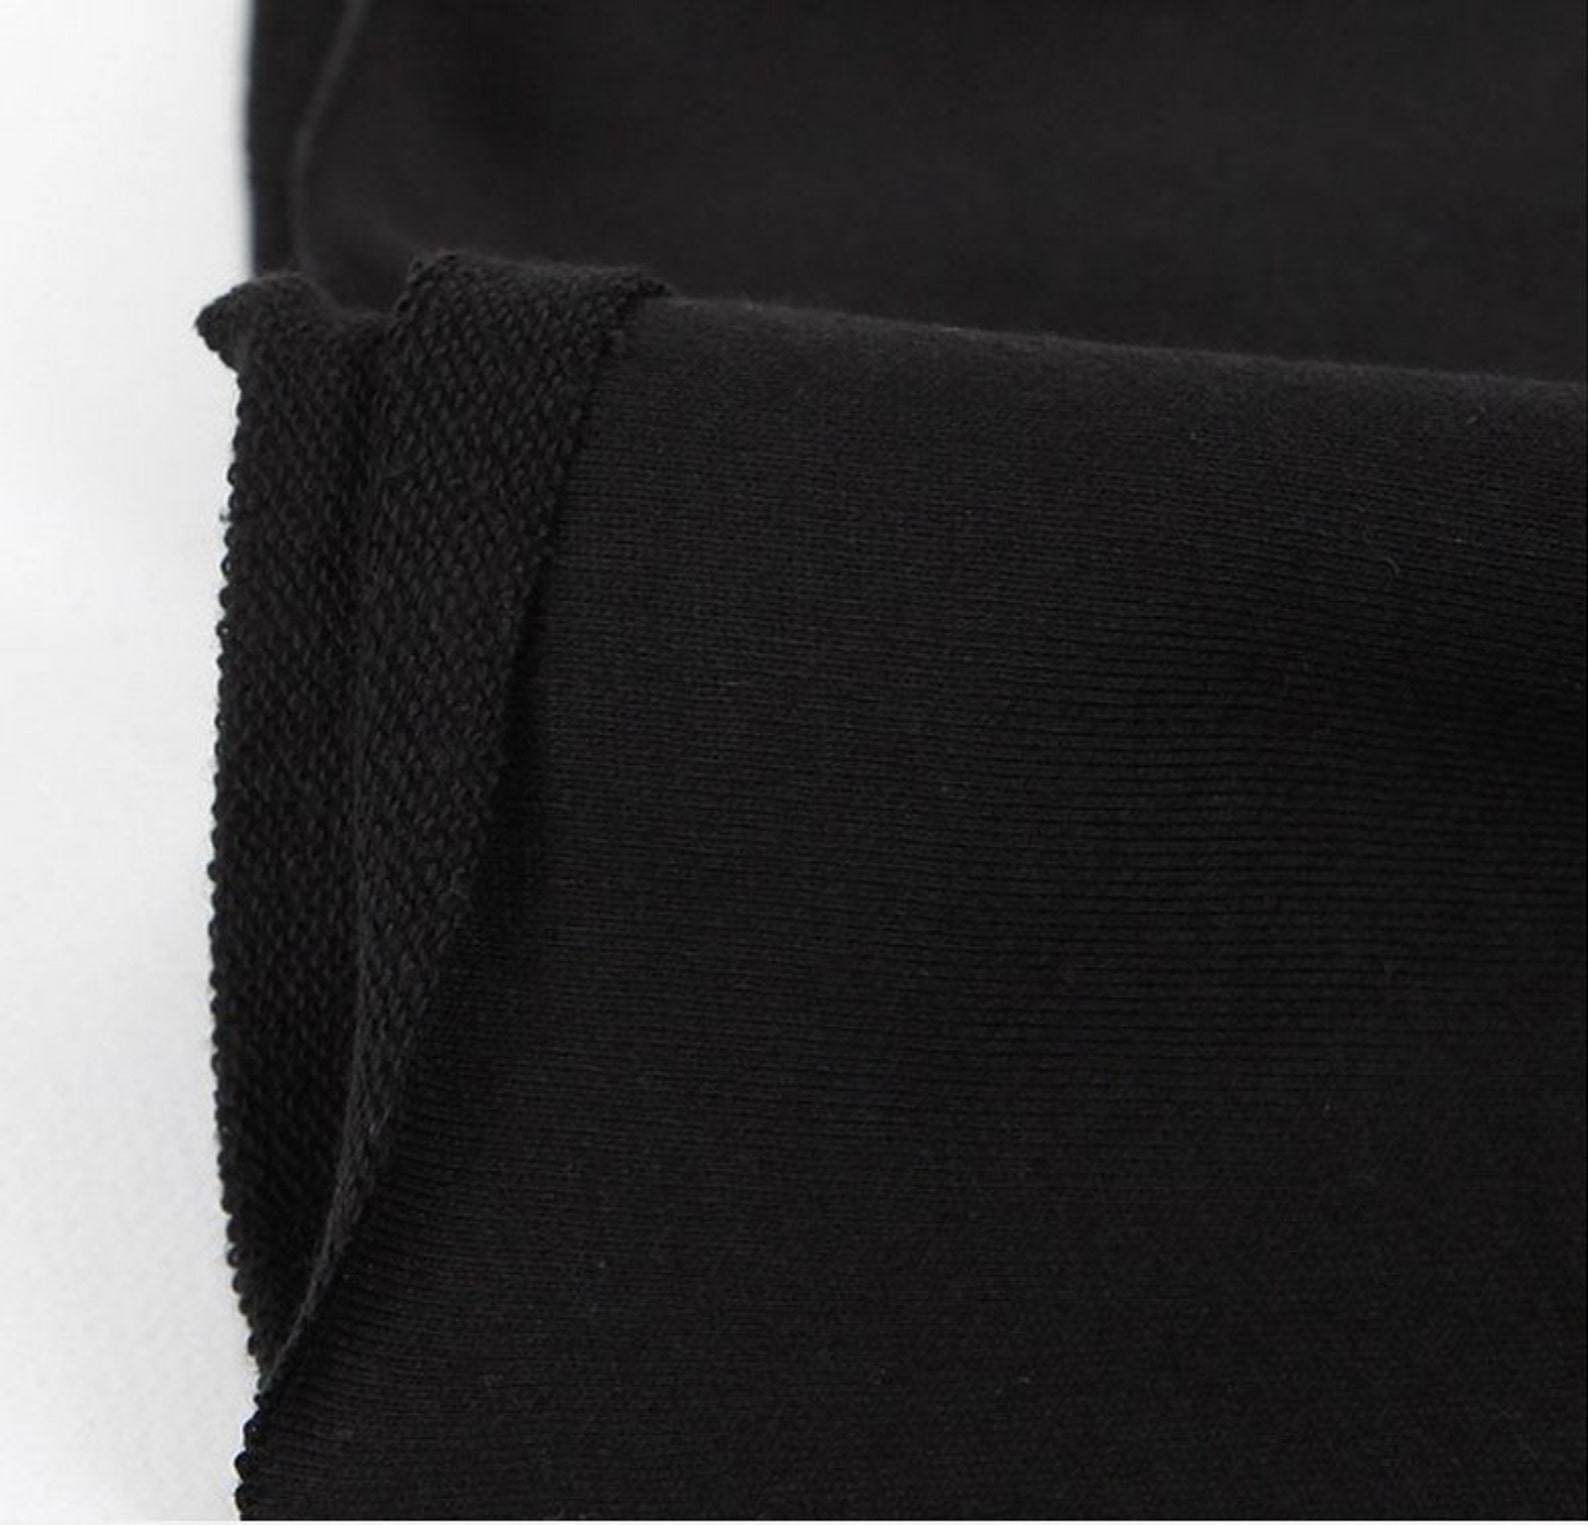 French Heavy Terry Knit Fabric Solid Black By The Yard | Etsy